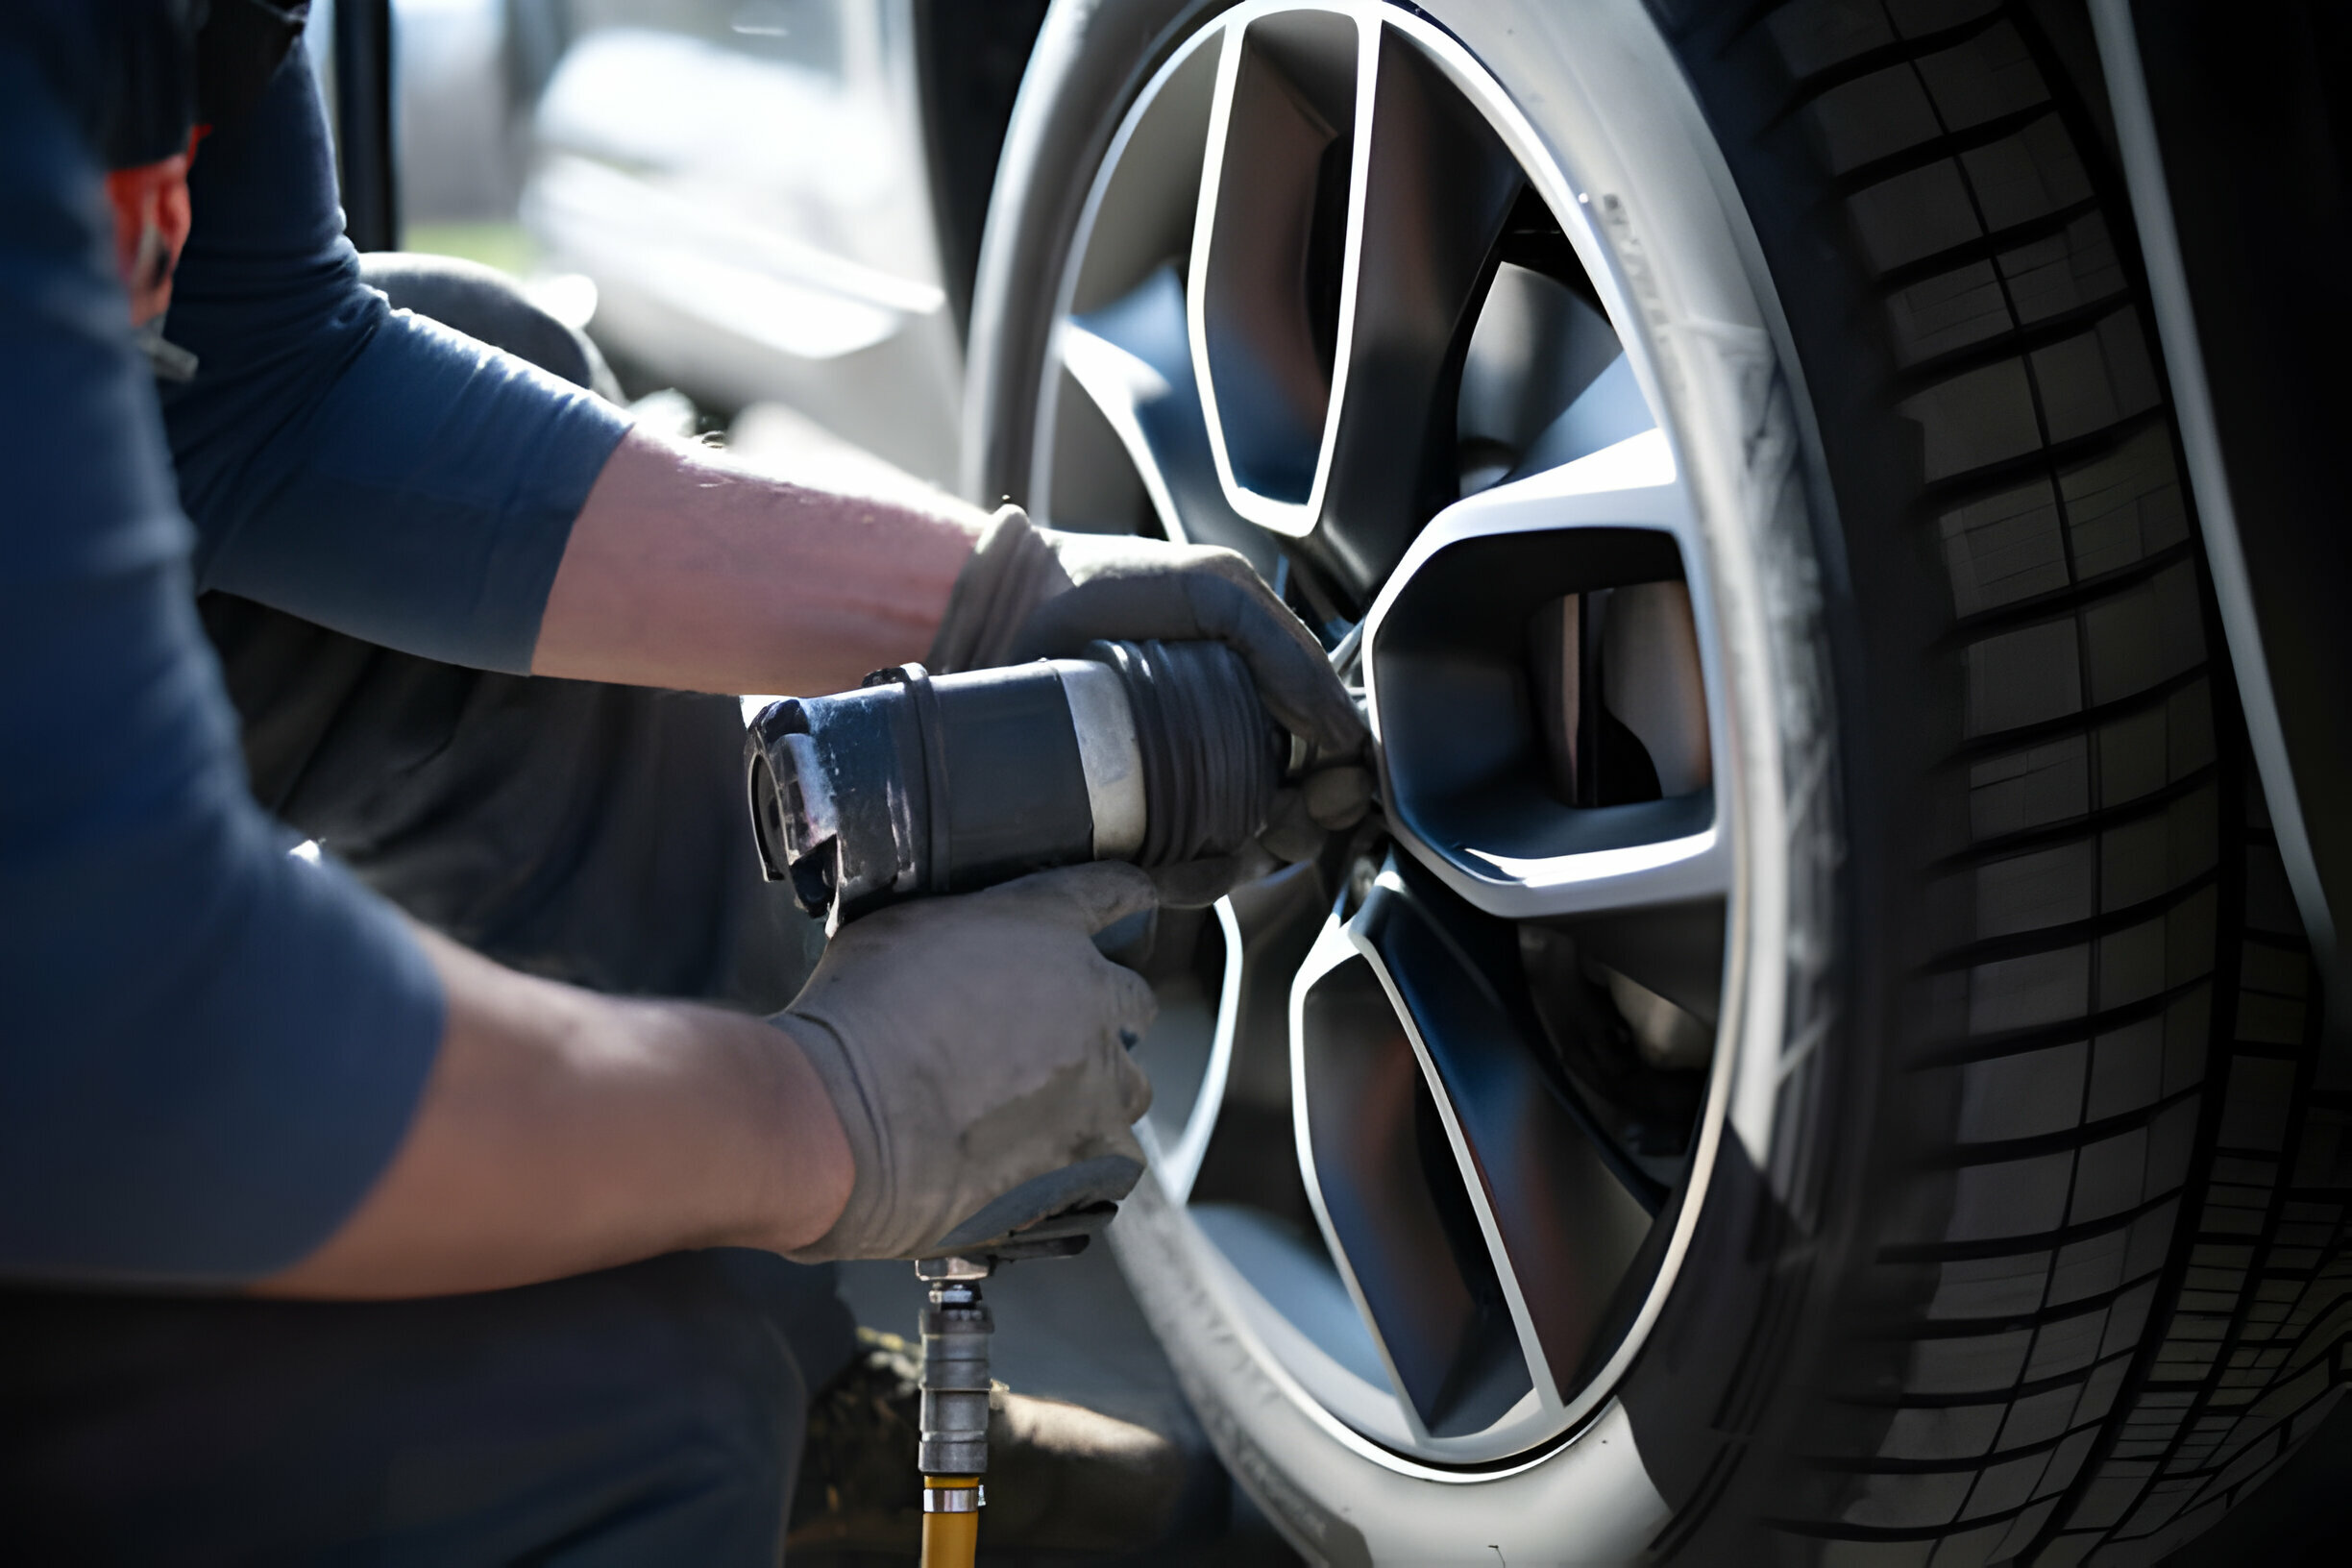 Your Trusted Partner for Anytime Tire Needs: I & I Tire Services’ 24-Hour Assistance